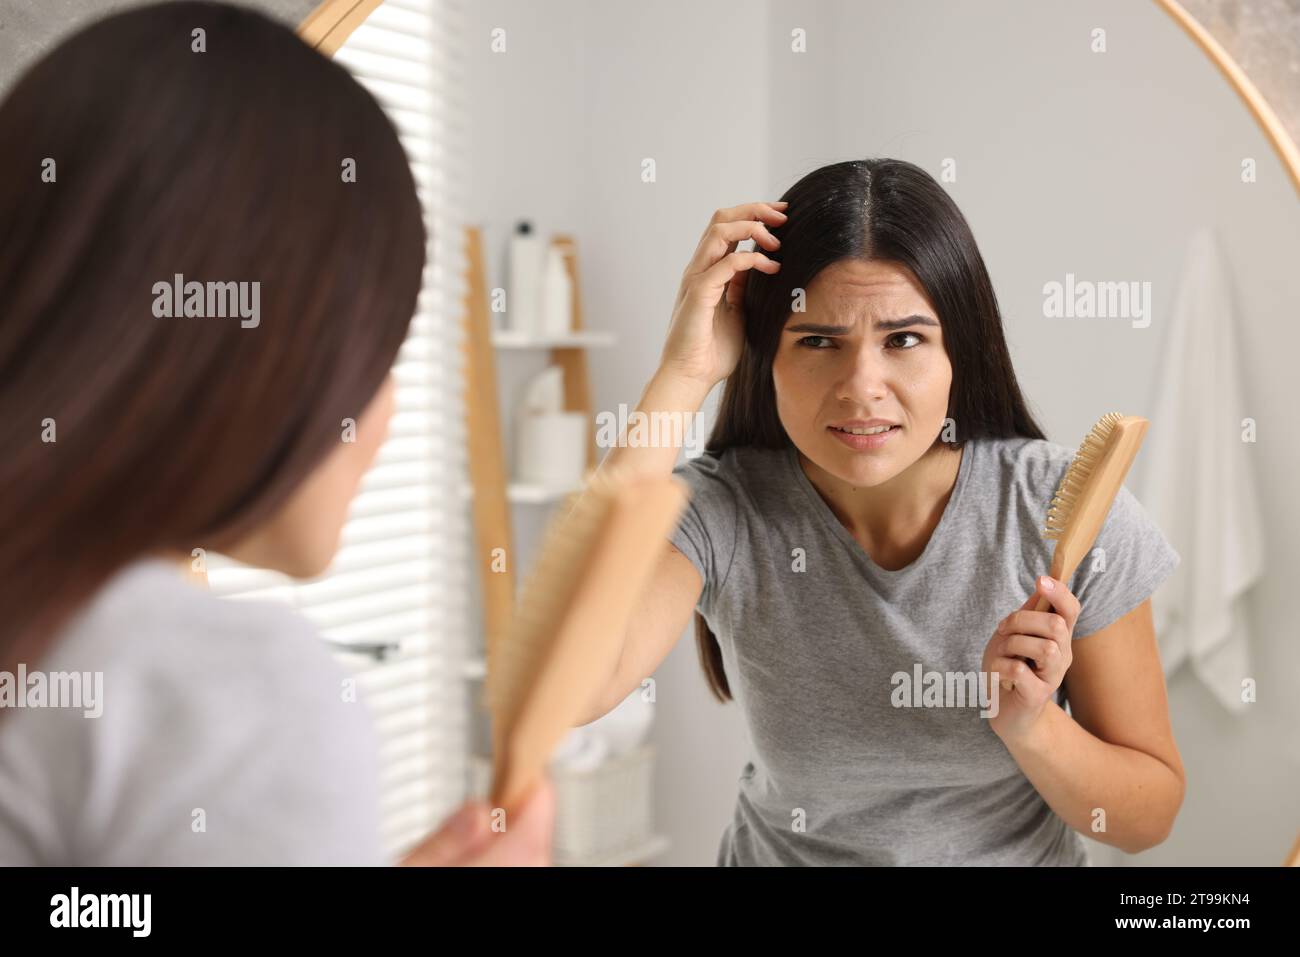 Emotional woman with brush examining her hair and scalp near mirror in bathroom. Dandruff problem Stock Photo